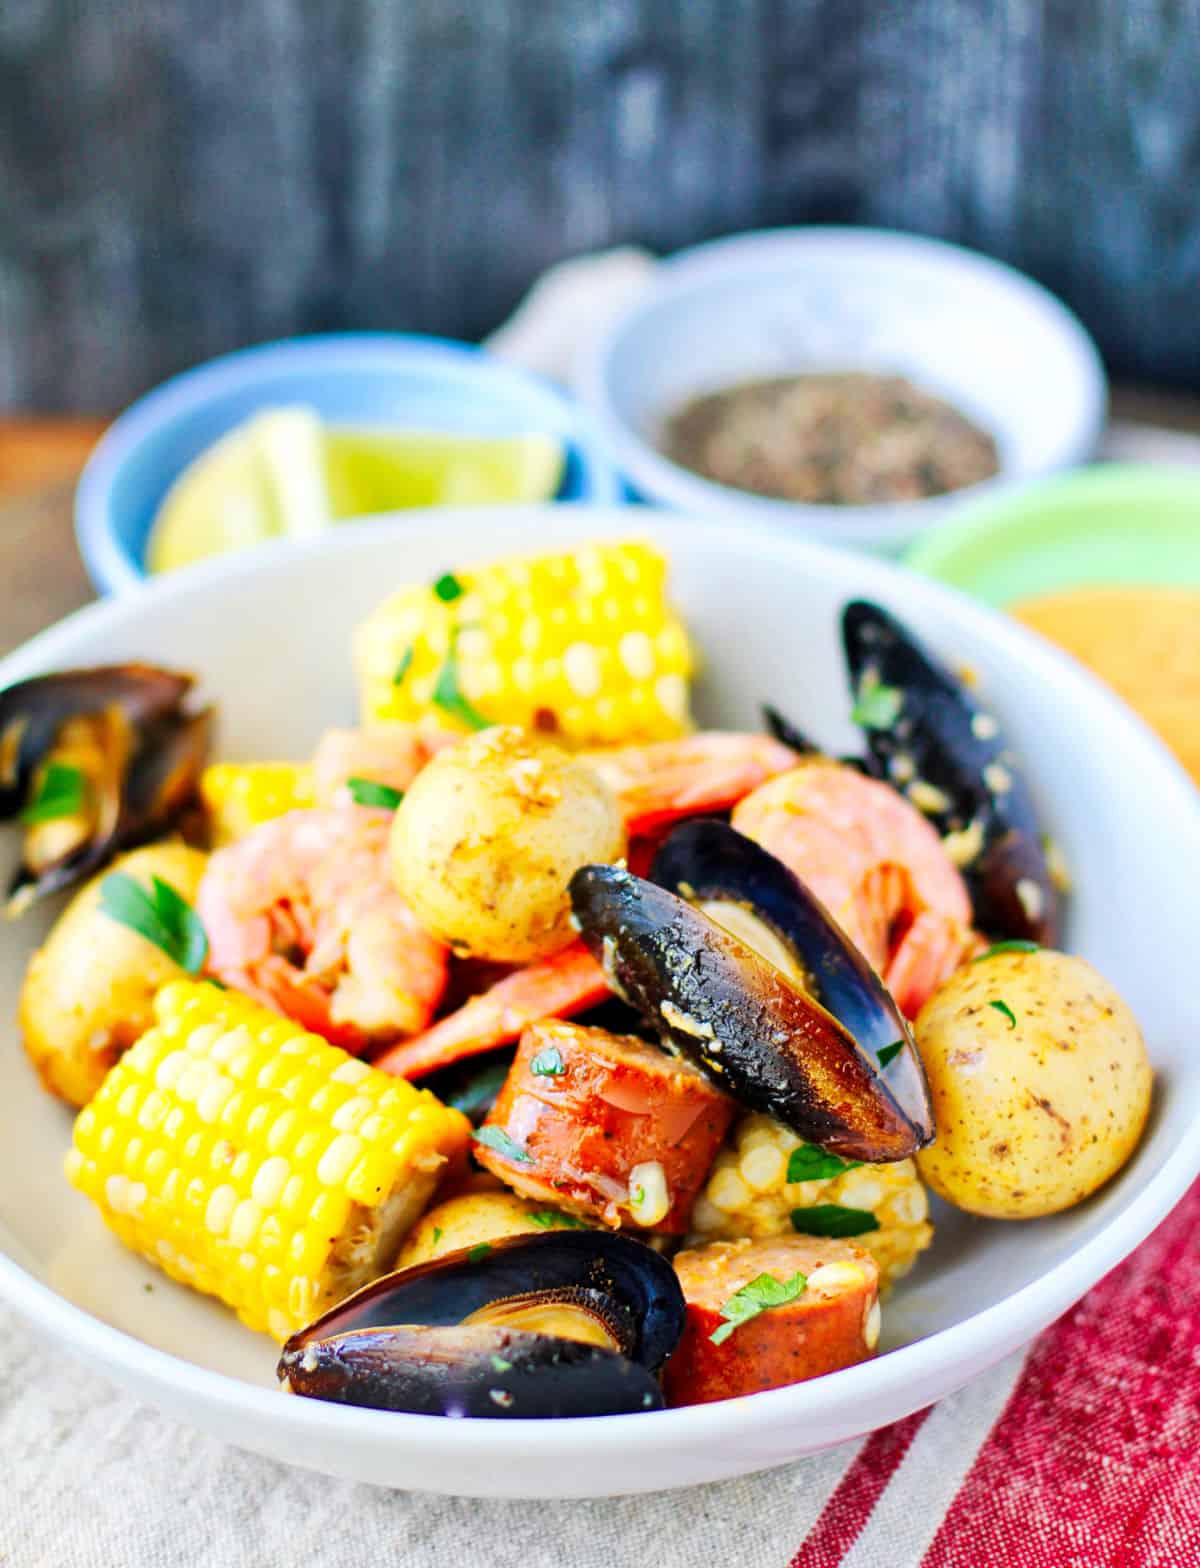 Viet-Cajun Seafood Boil in a bowl with sauces.